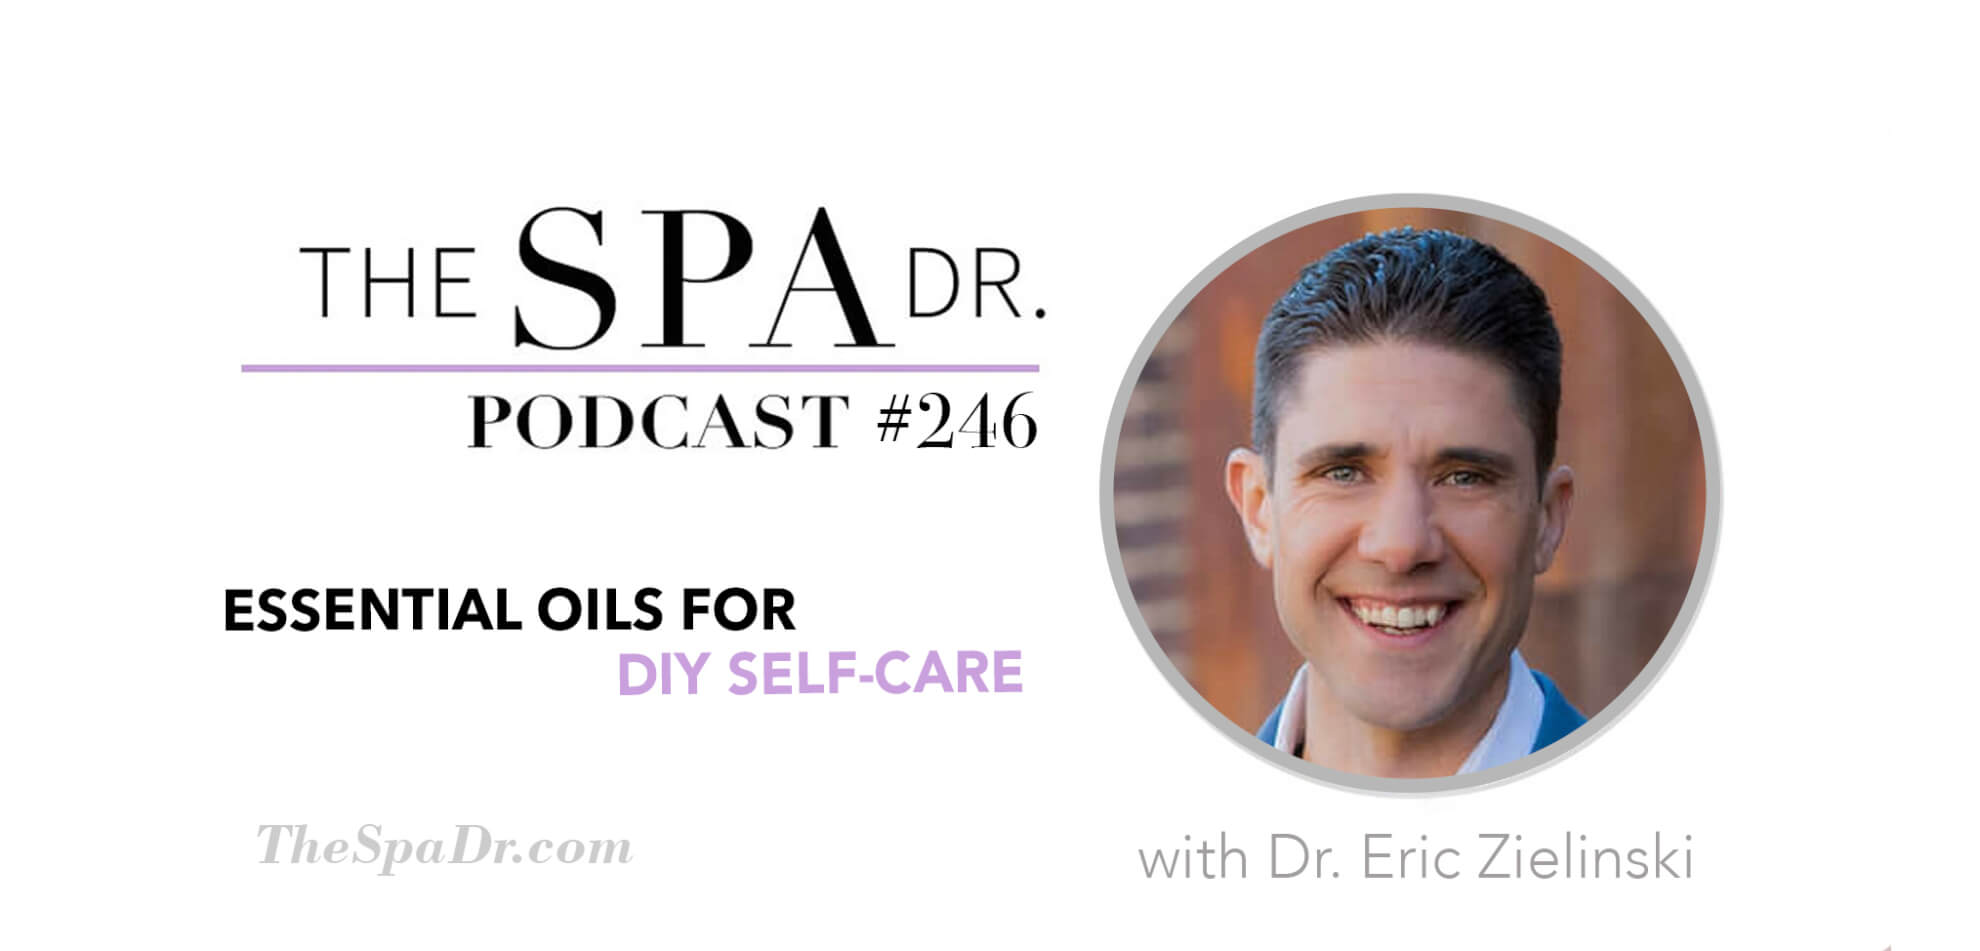 Essential Oils for DIY Self-Care with Dr. Eric Zielinski